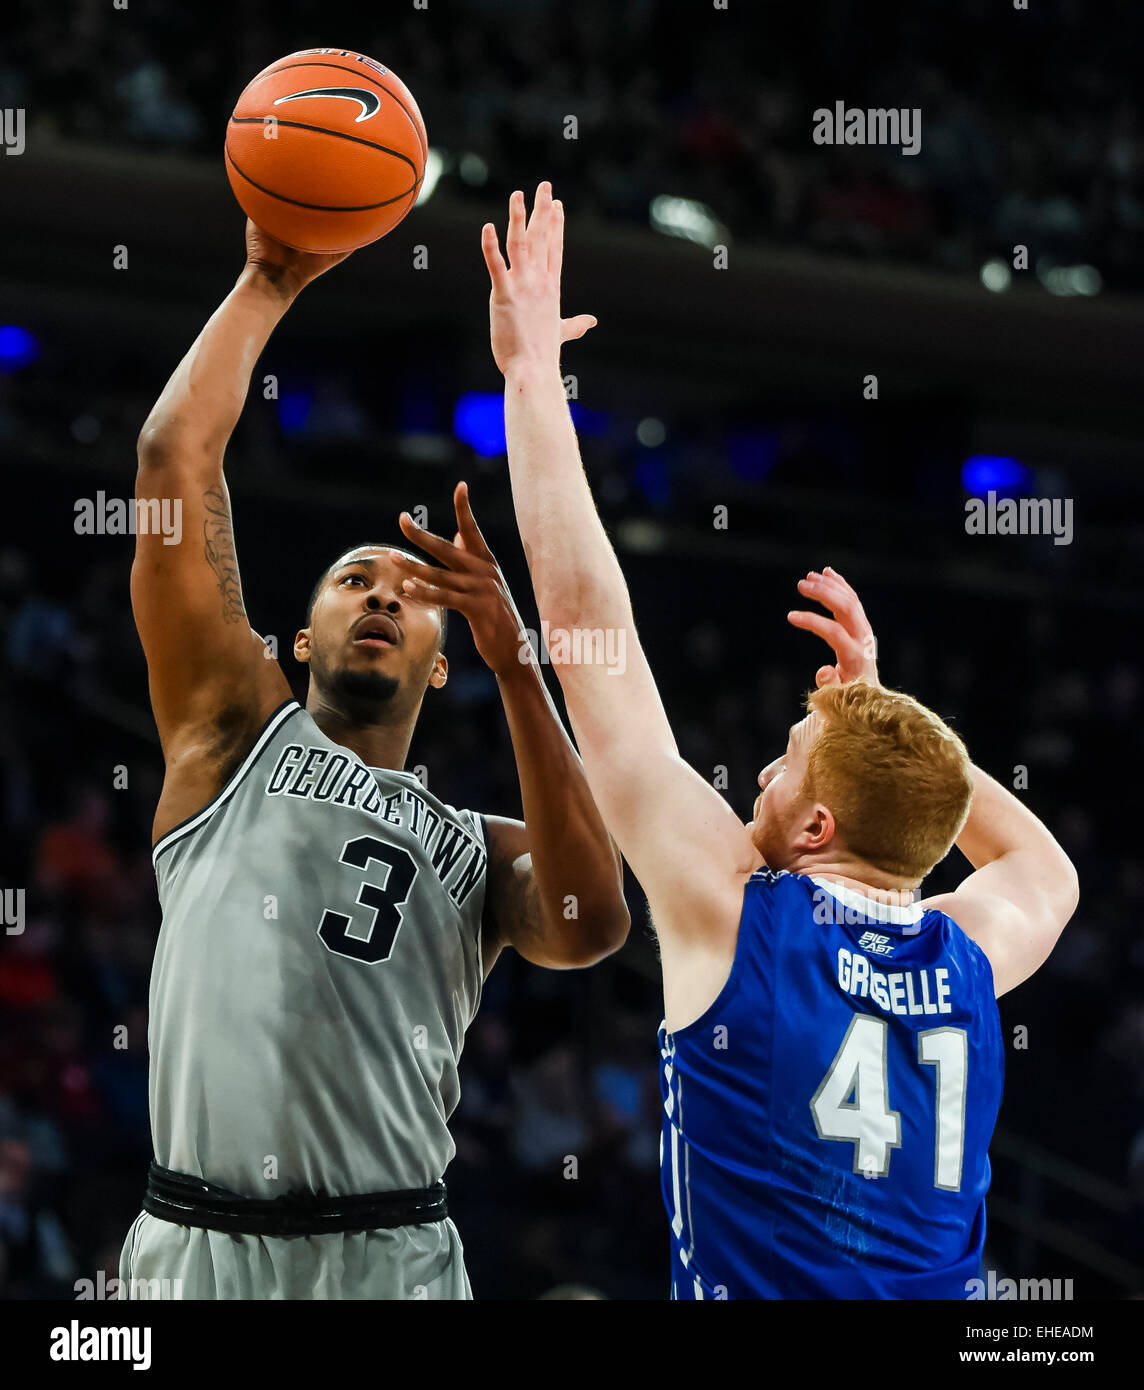 New York, NY, USA. 12th Mar, 2015. March 12, 2015: Georgetown senior forward Mikael Hopkins (3) jumps to take a shot against Creighton junior center Geoffrey Groselle (41) during the matchup between the Creighton Bluejays and the Georgetown Hoyas in the Big East Tournament at Madison Square Garden in New York, New York. Scott Serio/CSM/Alamy Live News Stock Photo